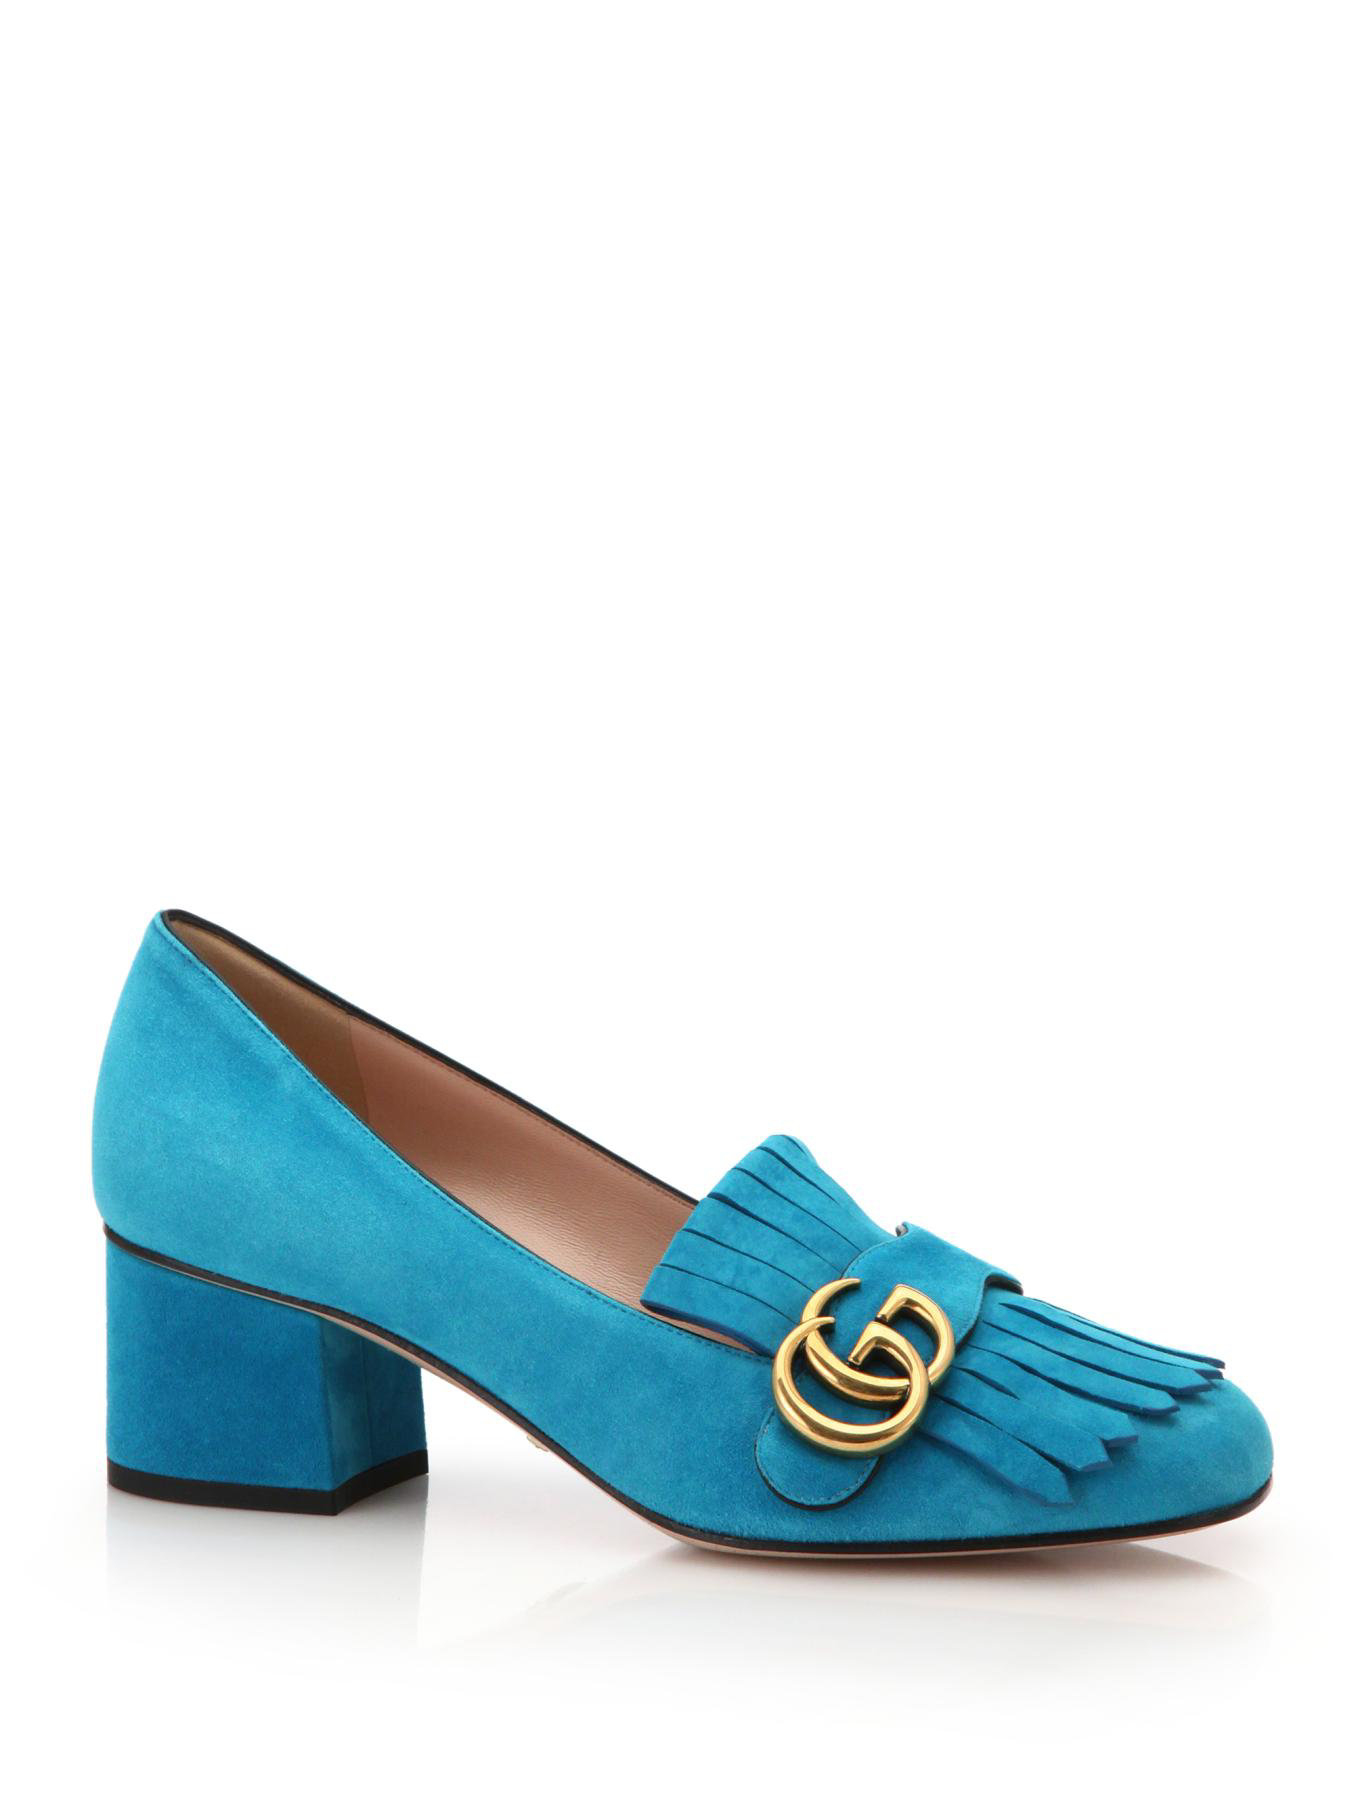 Gucci Marmont GG Suede Pumps in Blue | Lyst